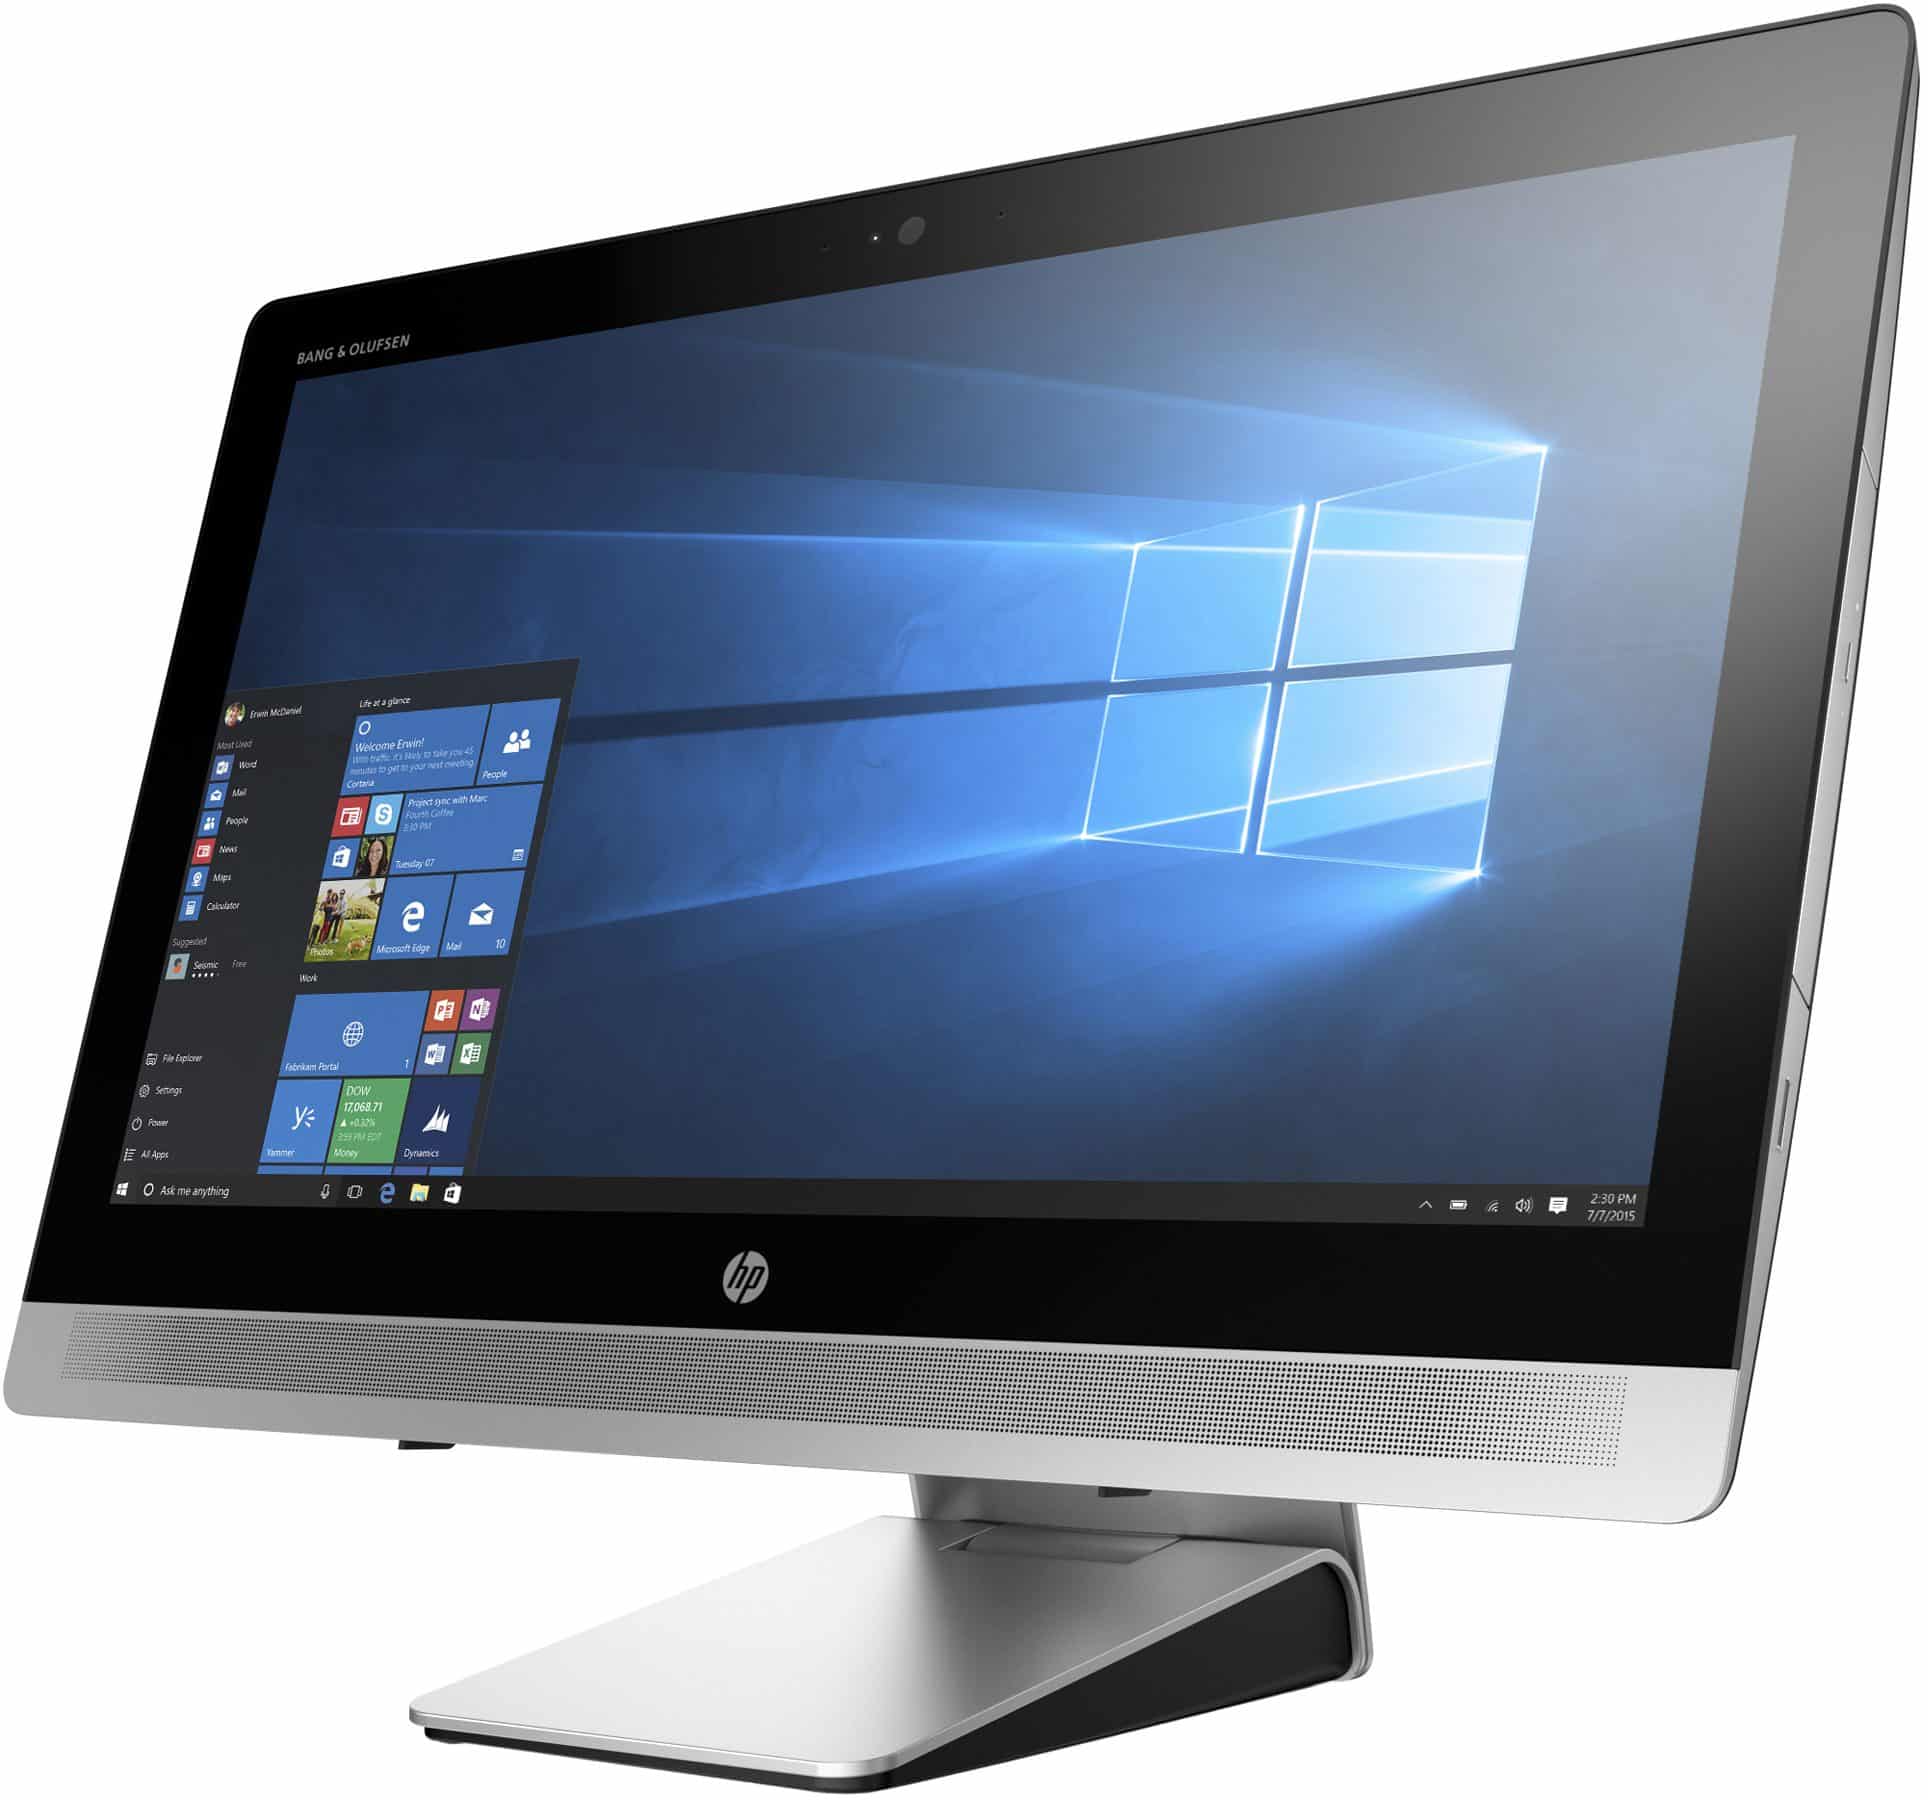 HP EliteOne 800 G2 All-in-one 23